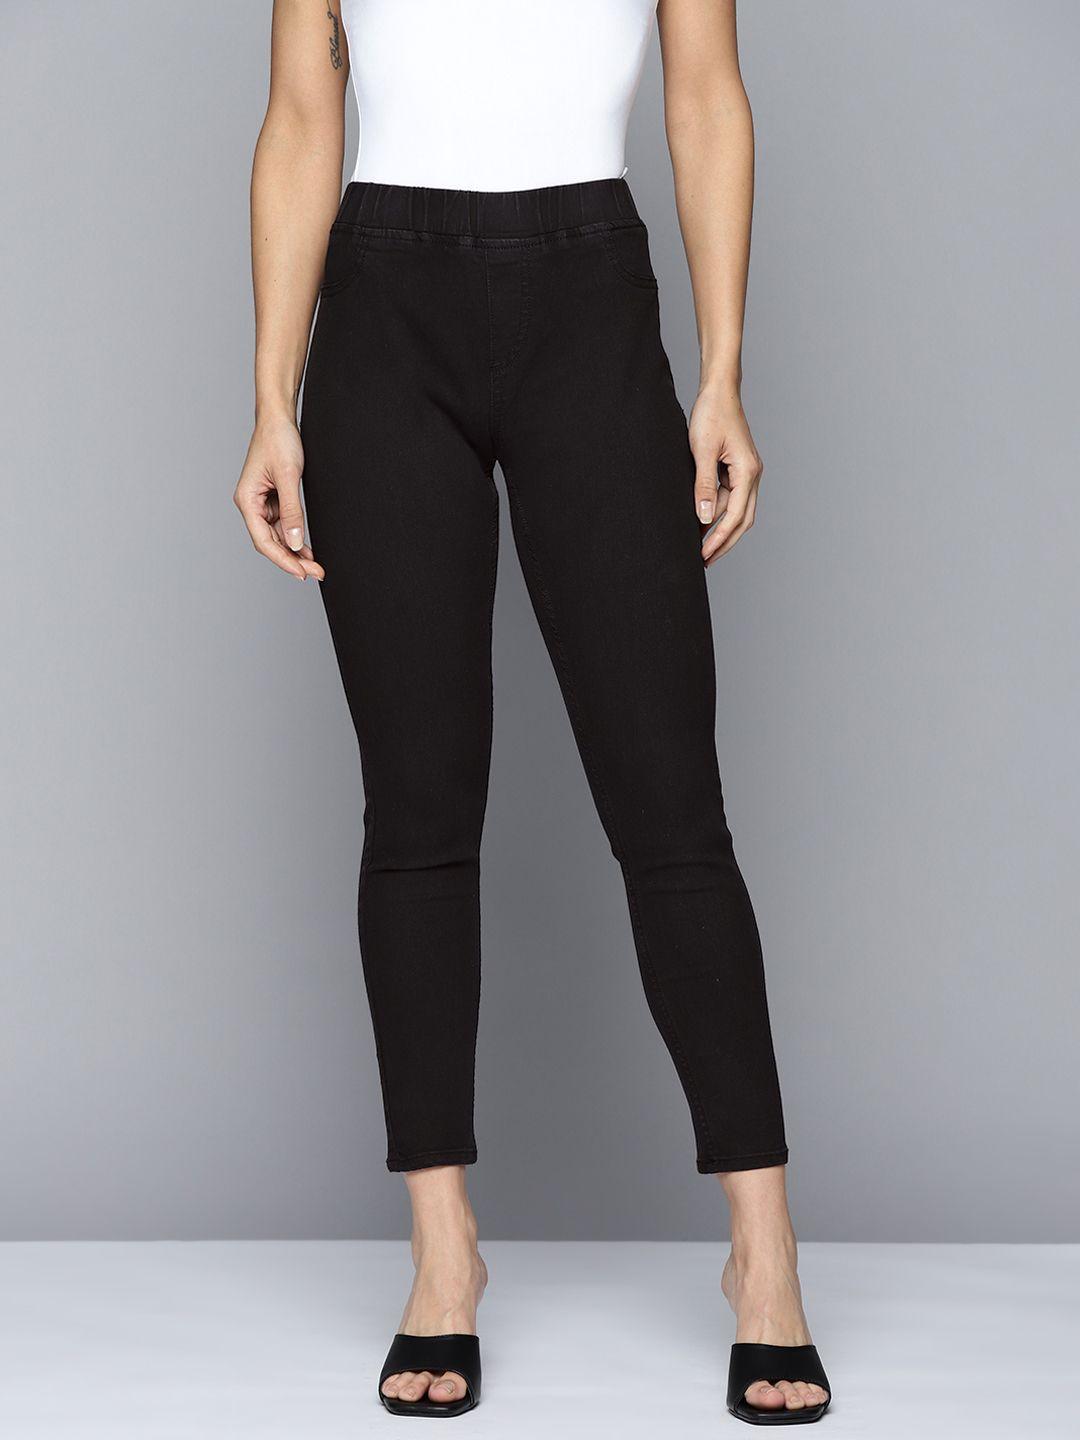 here&now women black solid jeggings